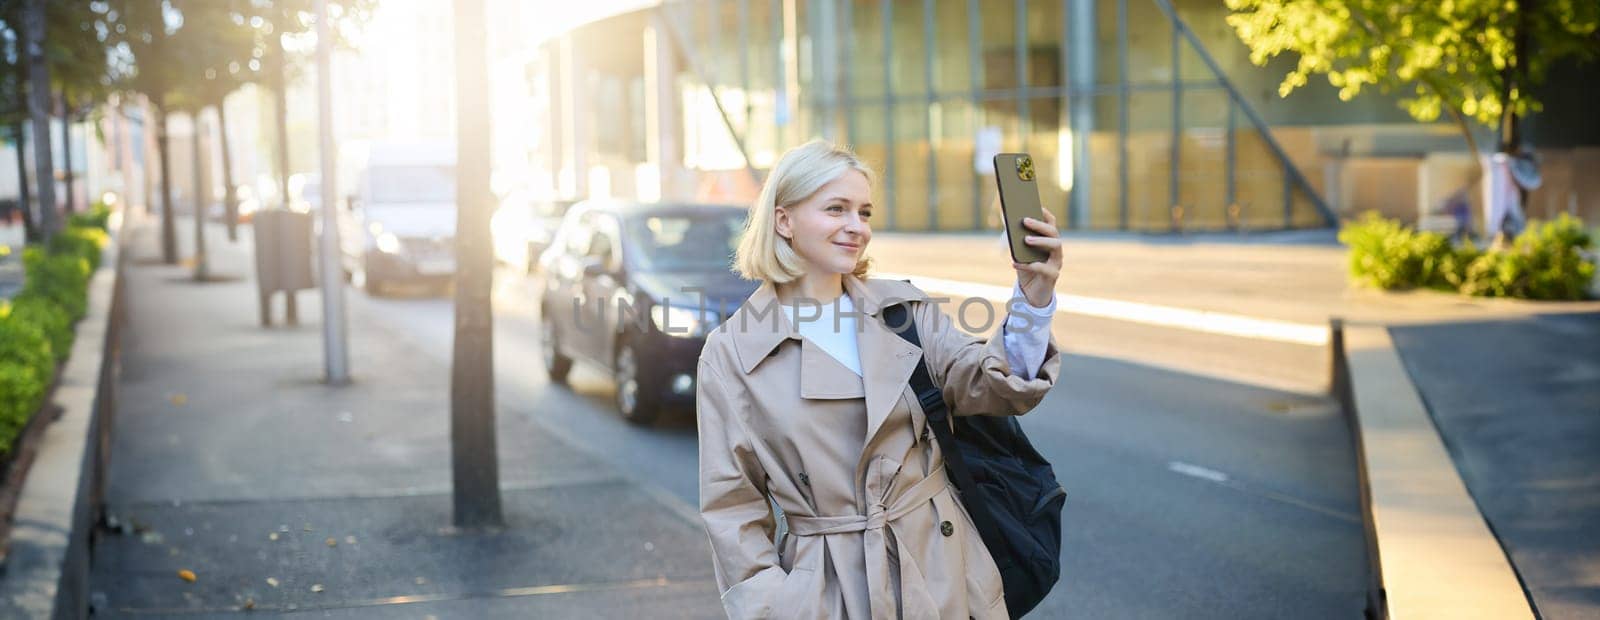 Image of stylish smiling woman, blogger taking selfie on street, smiling and posing for social media photo on smartphone, using mobile phone camera.